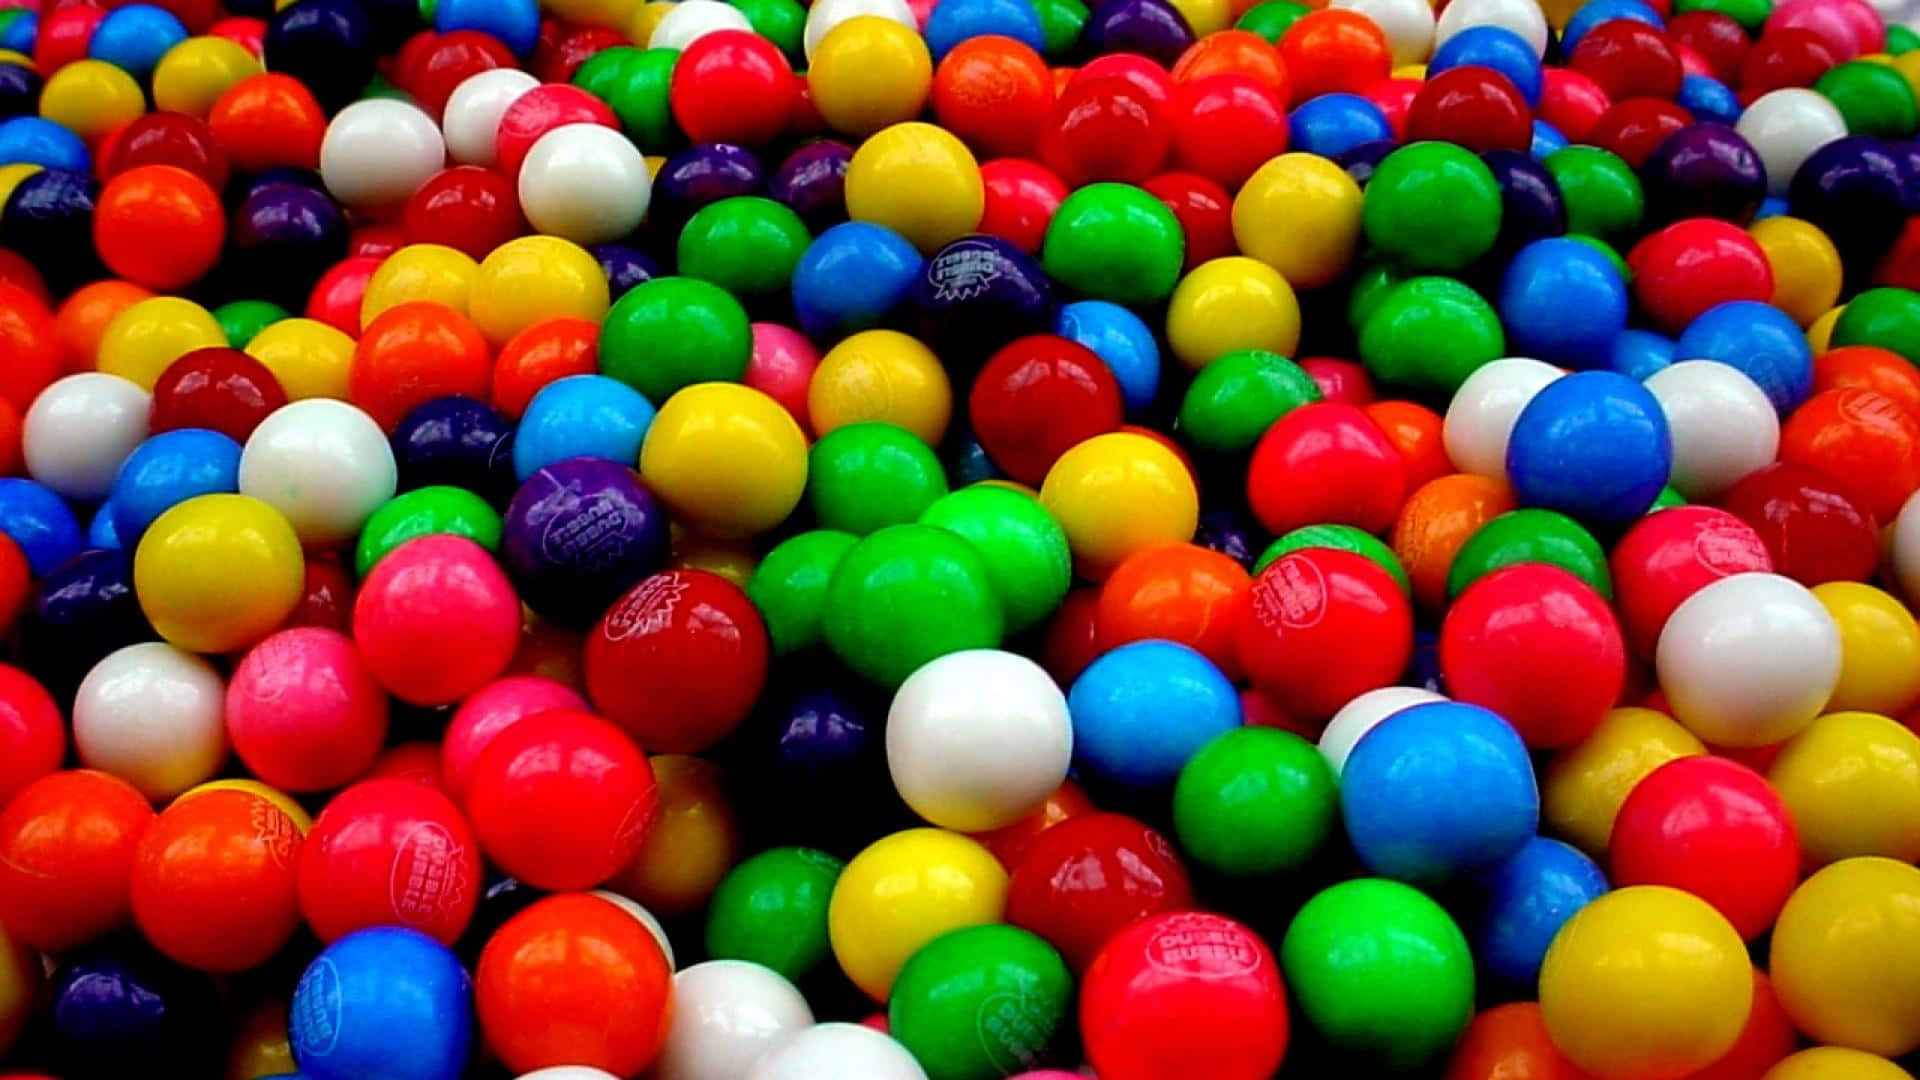 A Pile Of Colorful Candy Balls